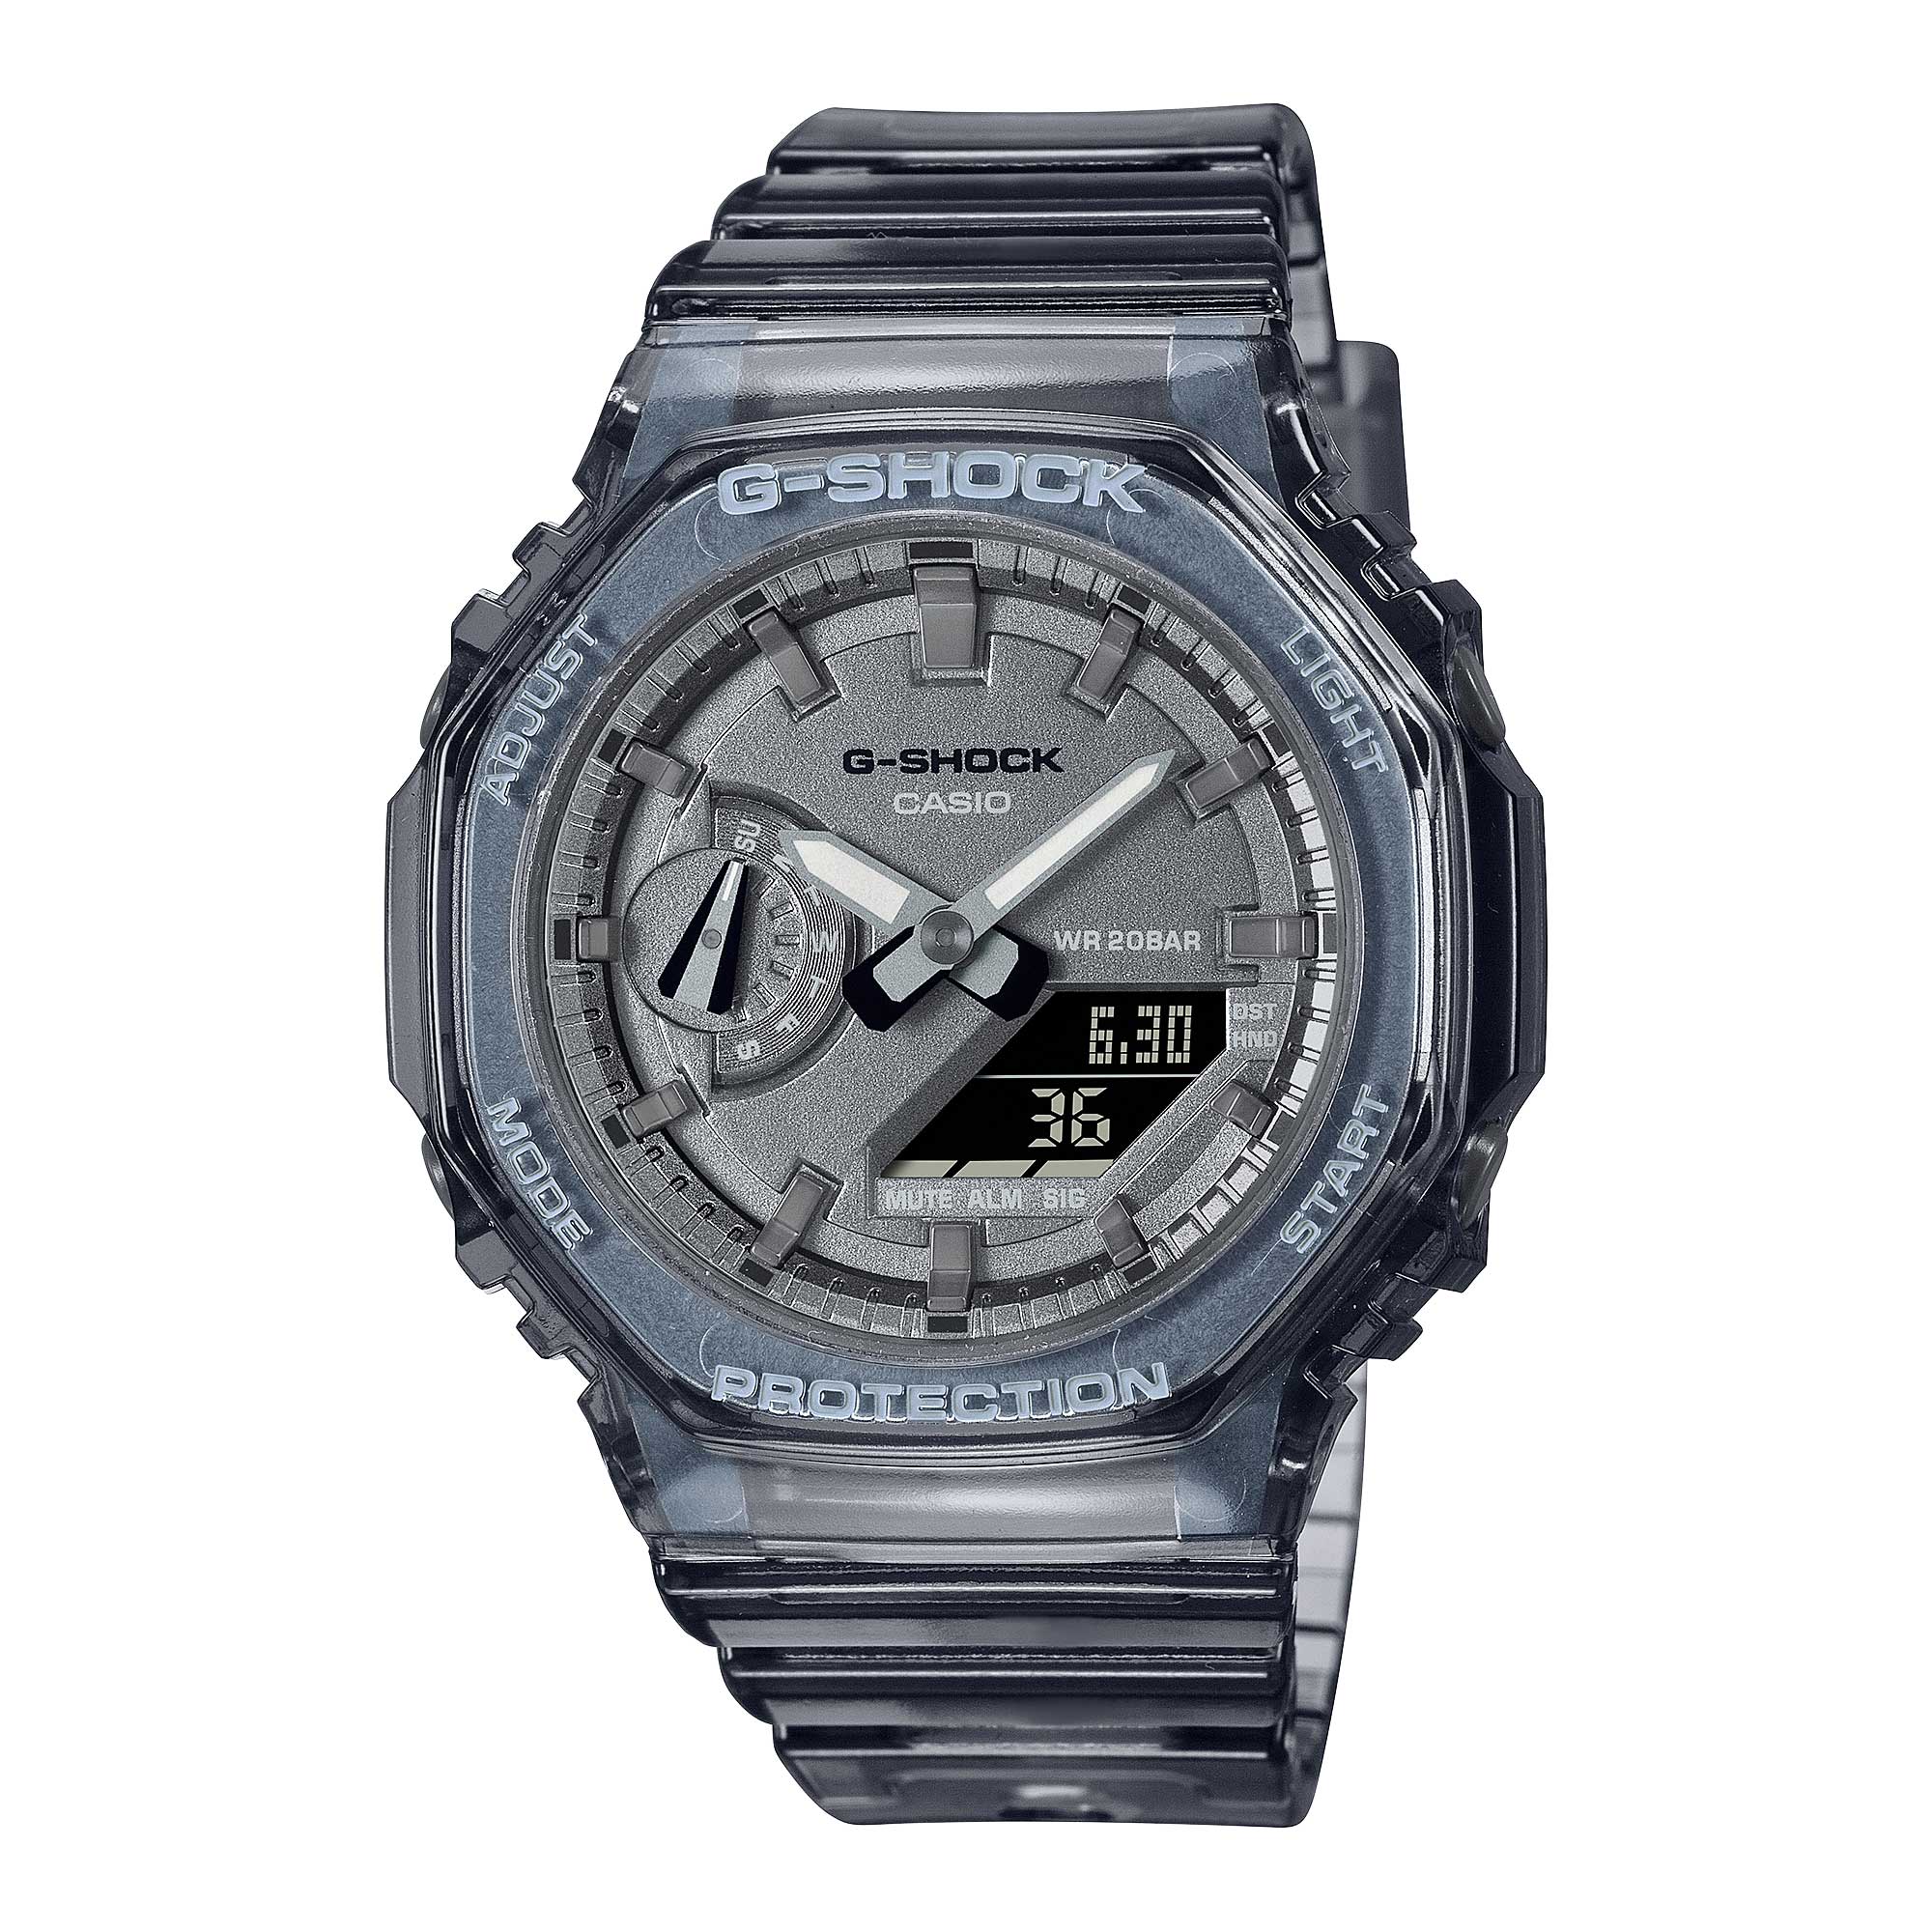 Casio G-Shock for Ladies' Metallic Translucent Design Series Carbon Core Guard Structure Black Translucent Resin Band Watch GMAS2100SK-1A GMA-S2100SK-1A Watchspree